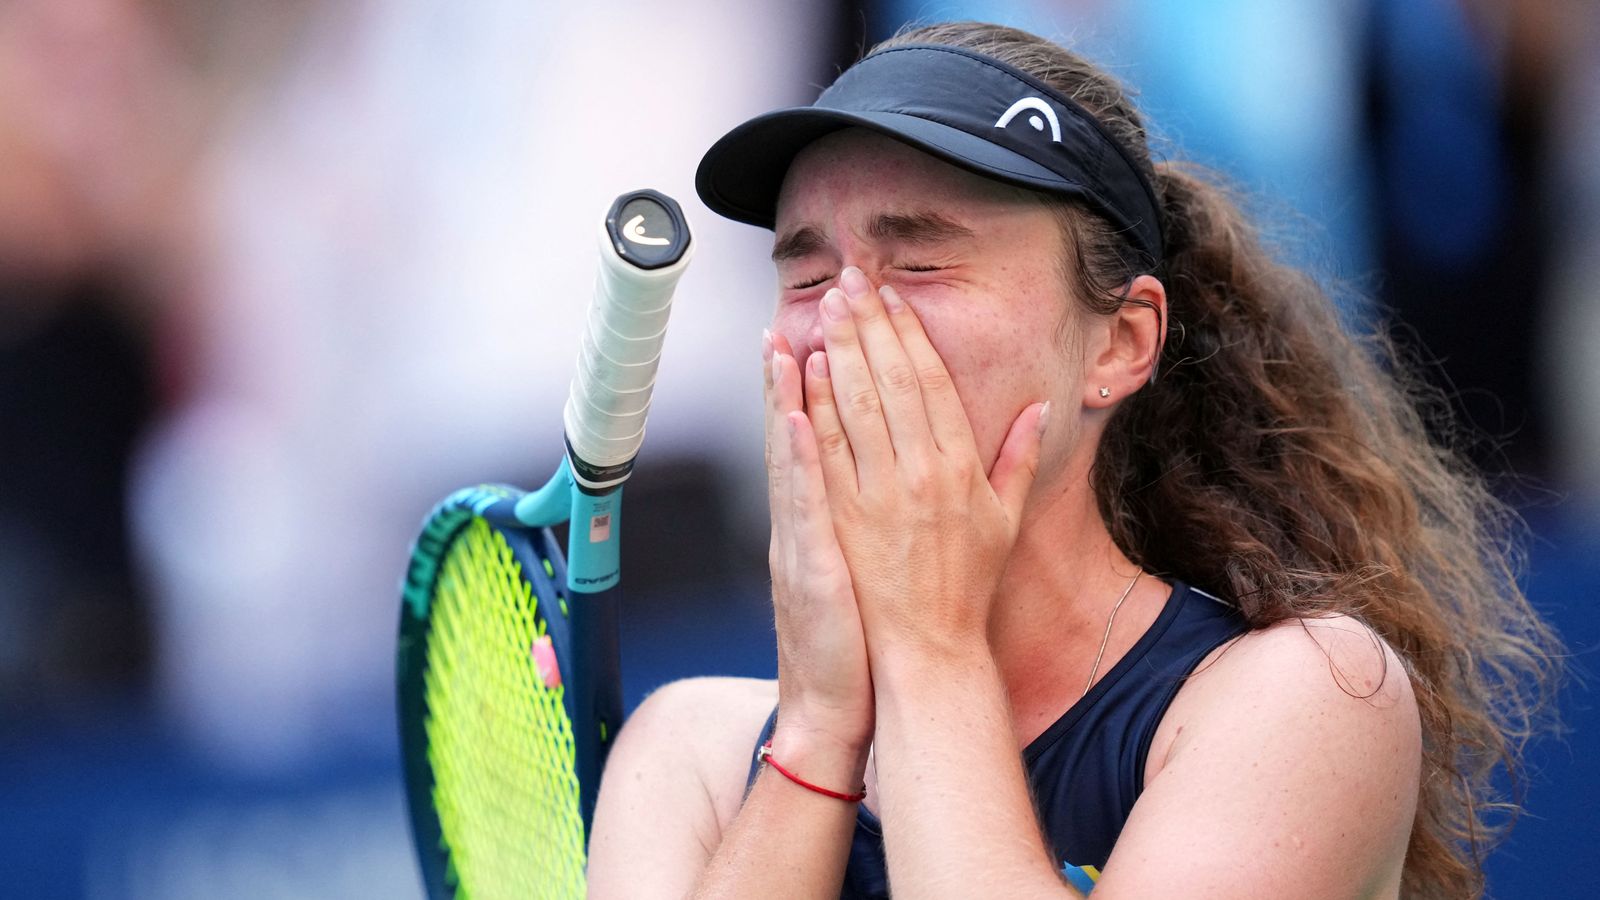 Ukrainian player Daria Snigur breaks down in tears after beating Simona Halep at US Open |  world news